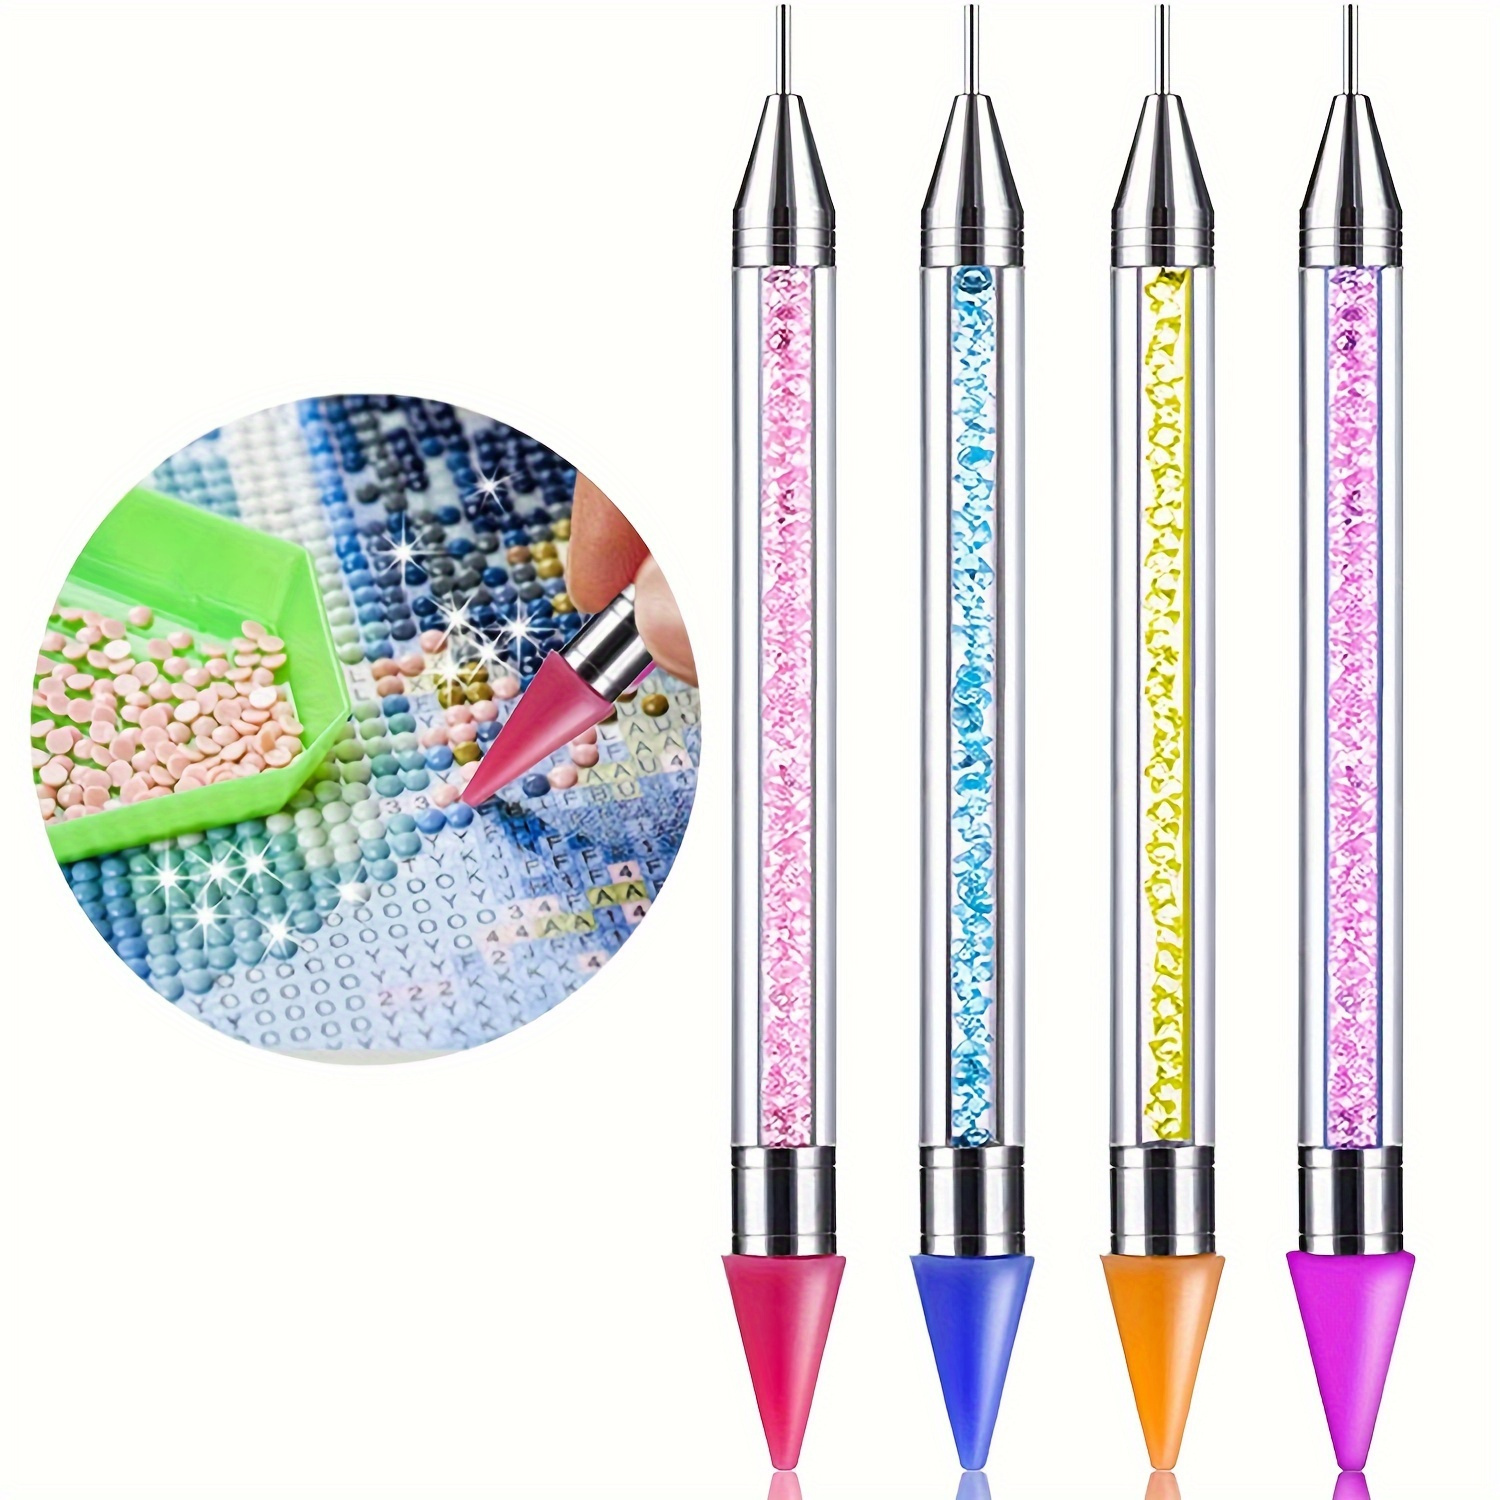 1pc Roller Tool For 5D Diamond Painting, DIY Diamond Painting Accessories  For Sticking Tightly, DIY Art Supplies